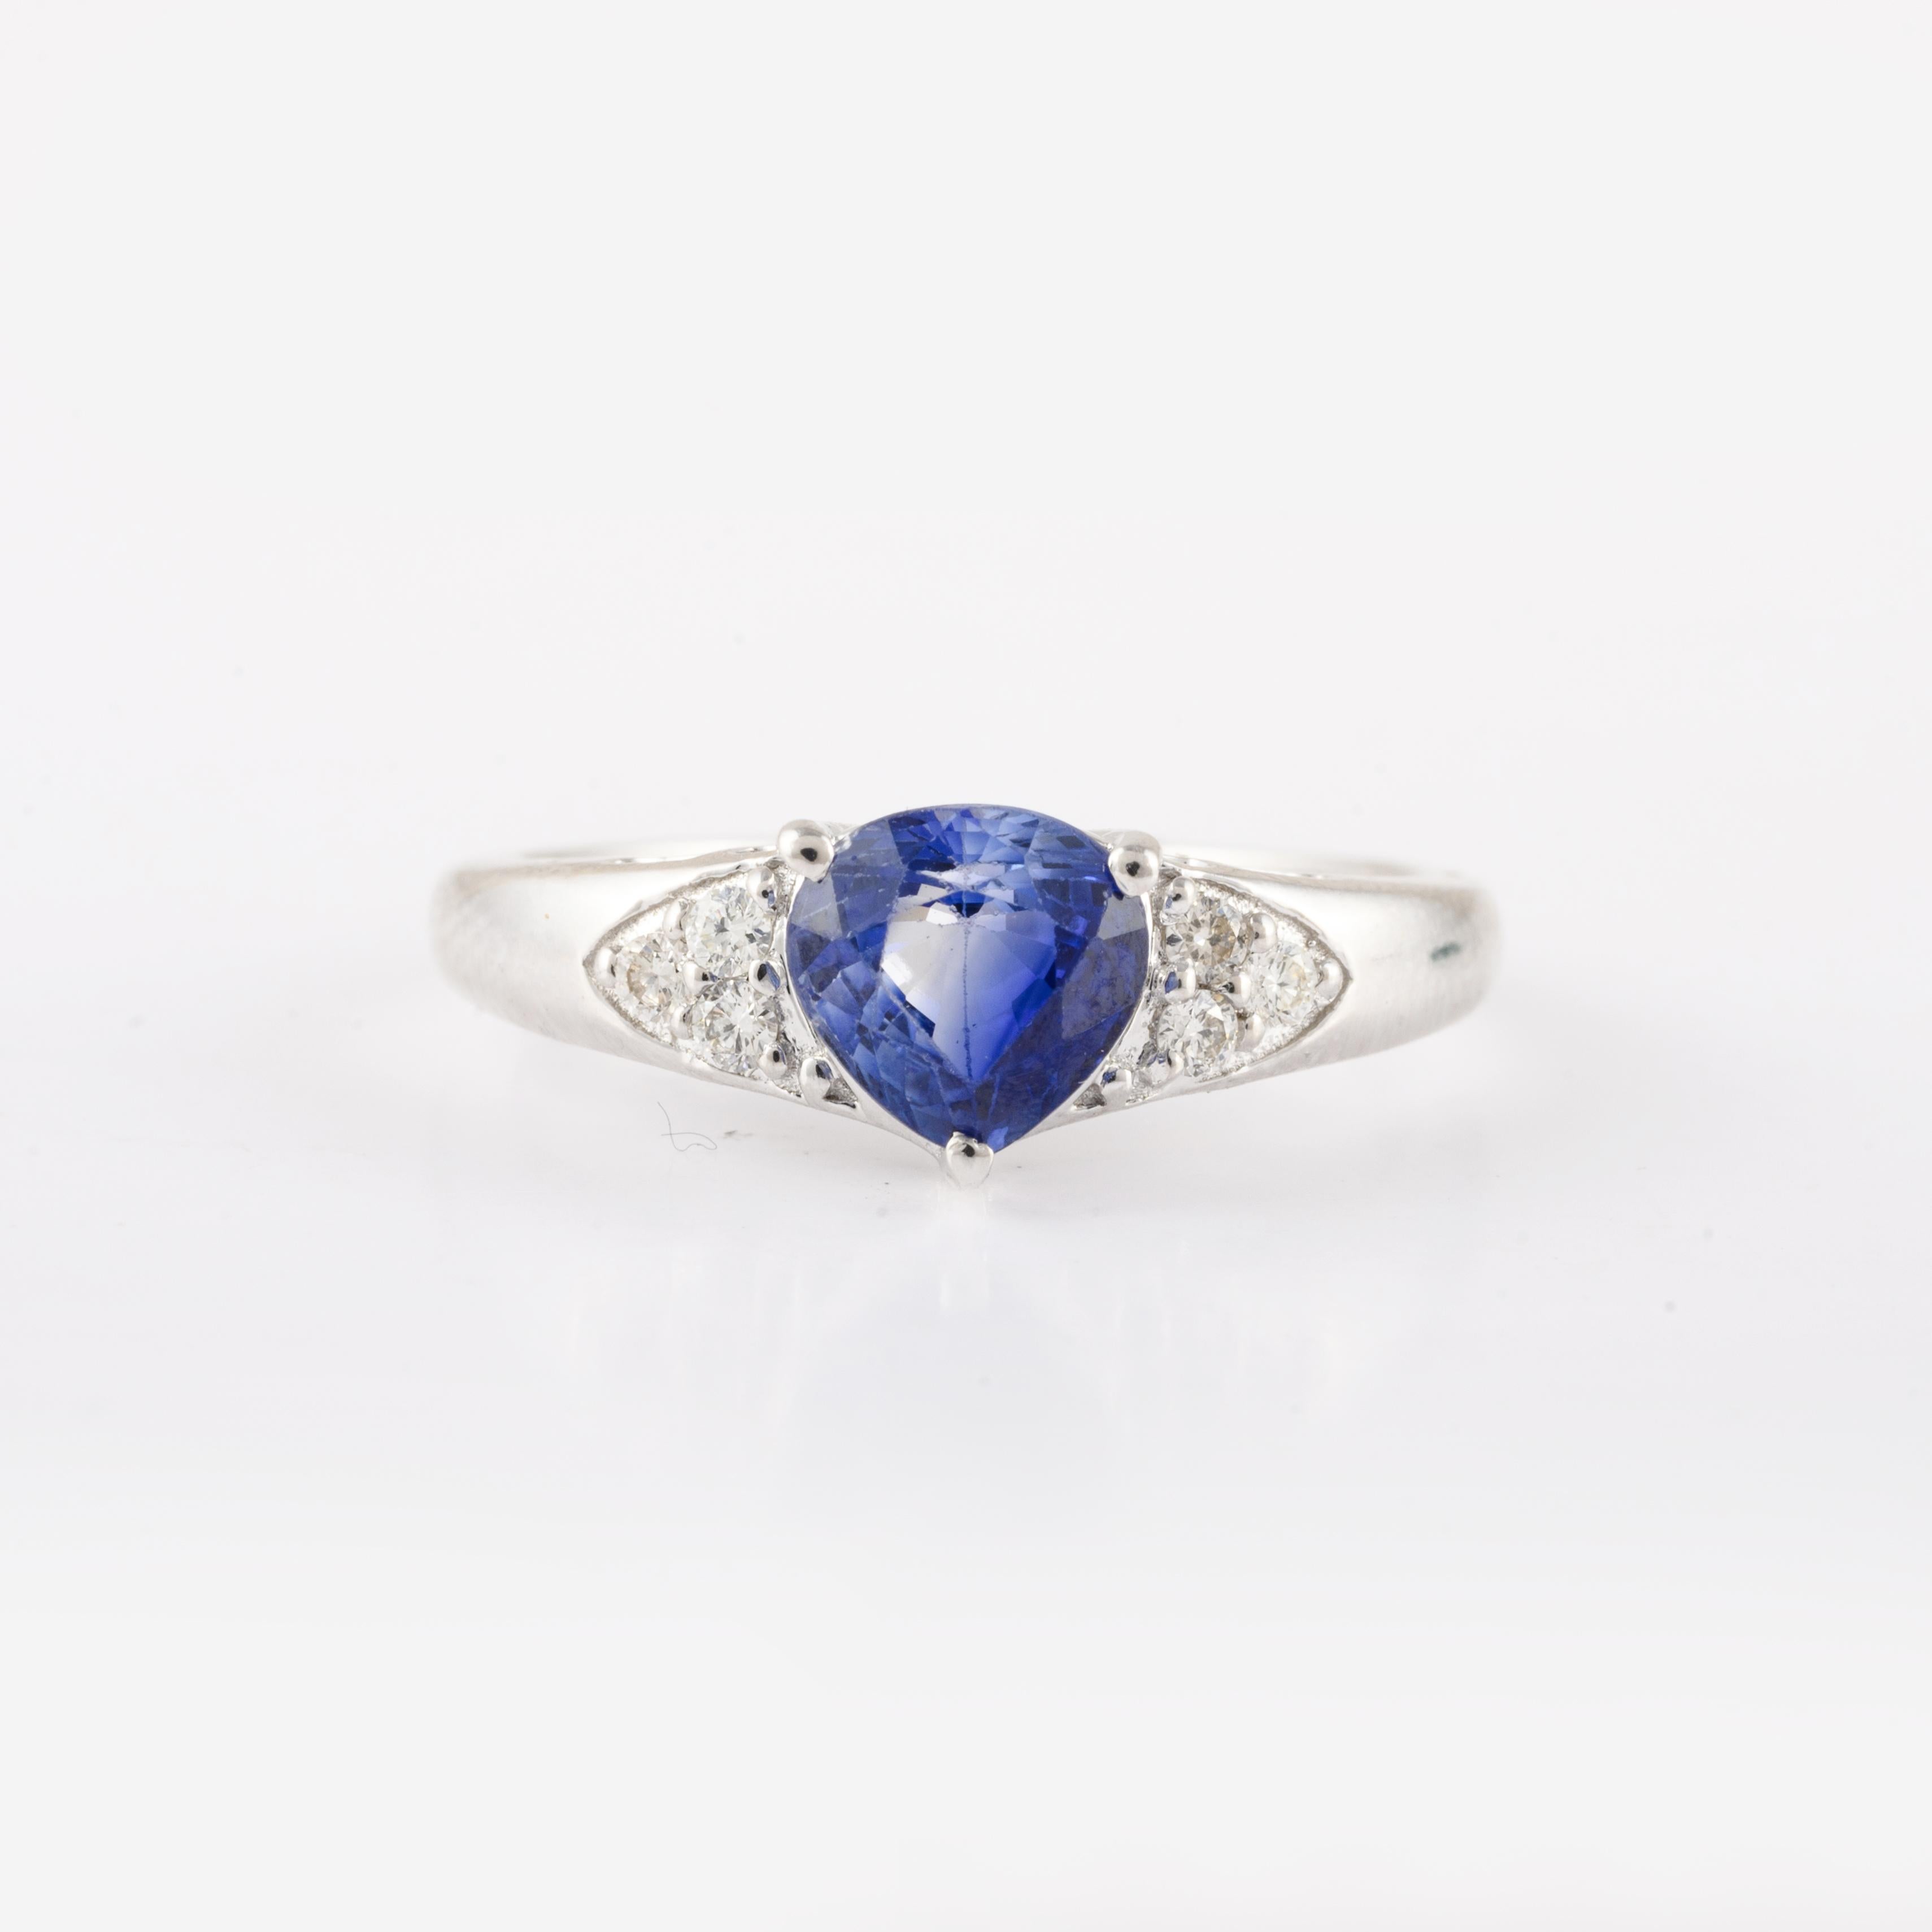 For Sale:  14k White Gold Trillion Cut Sapphire Birthstone Engagement Ring with Diamonds 2